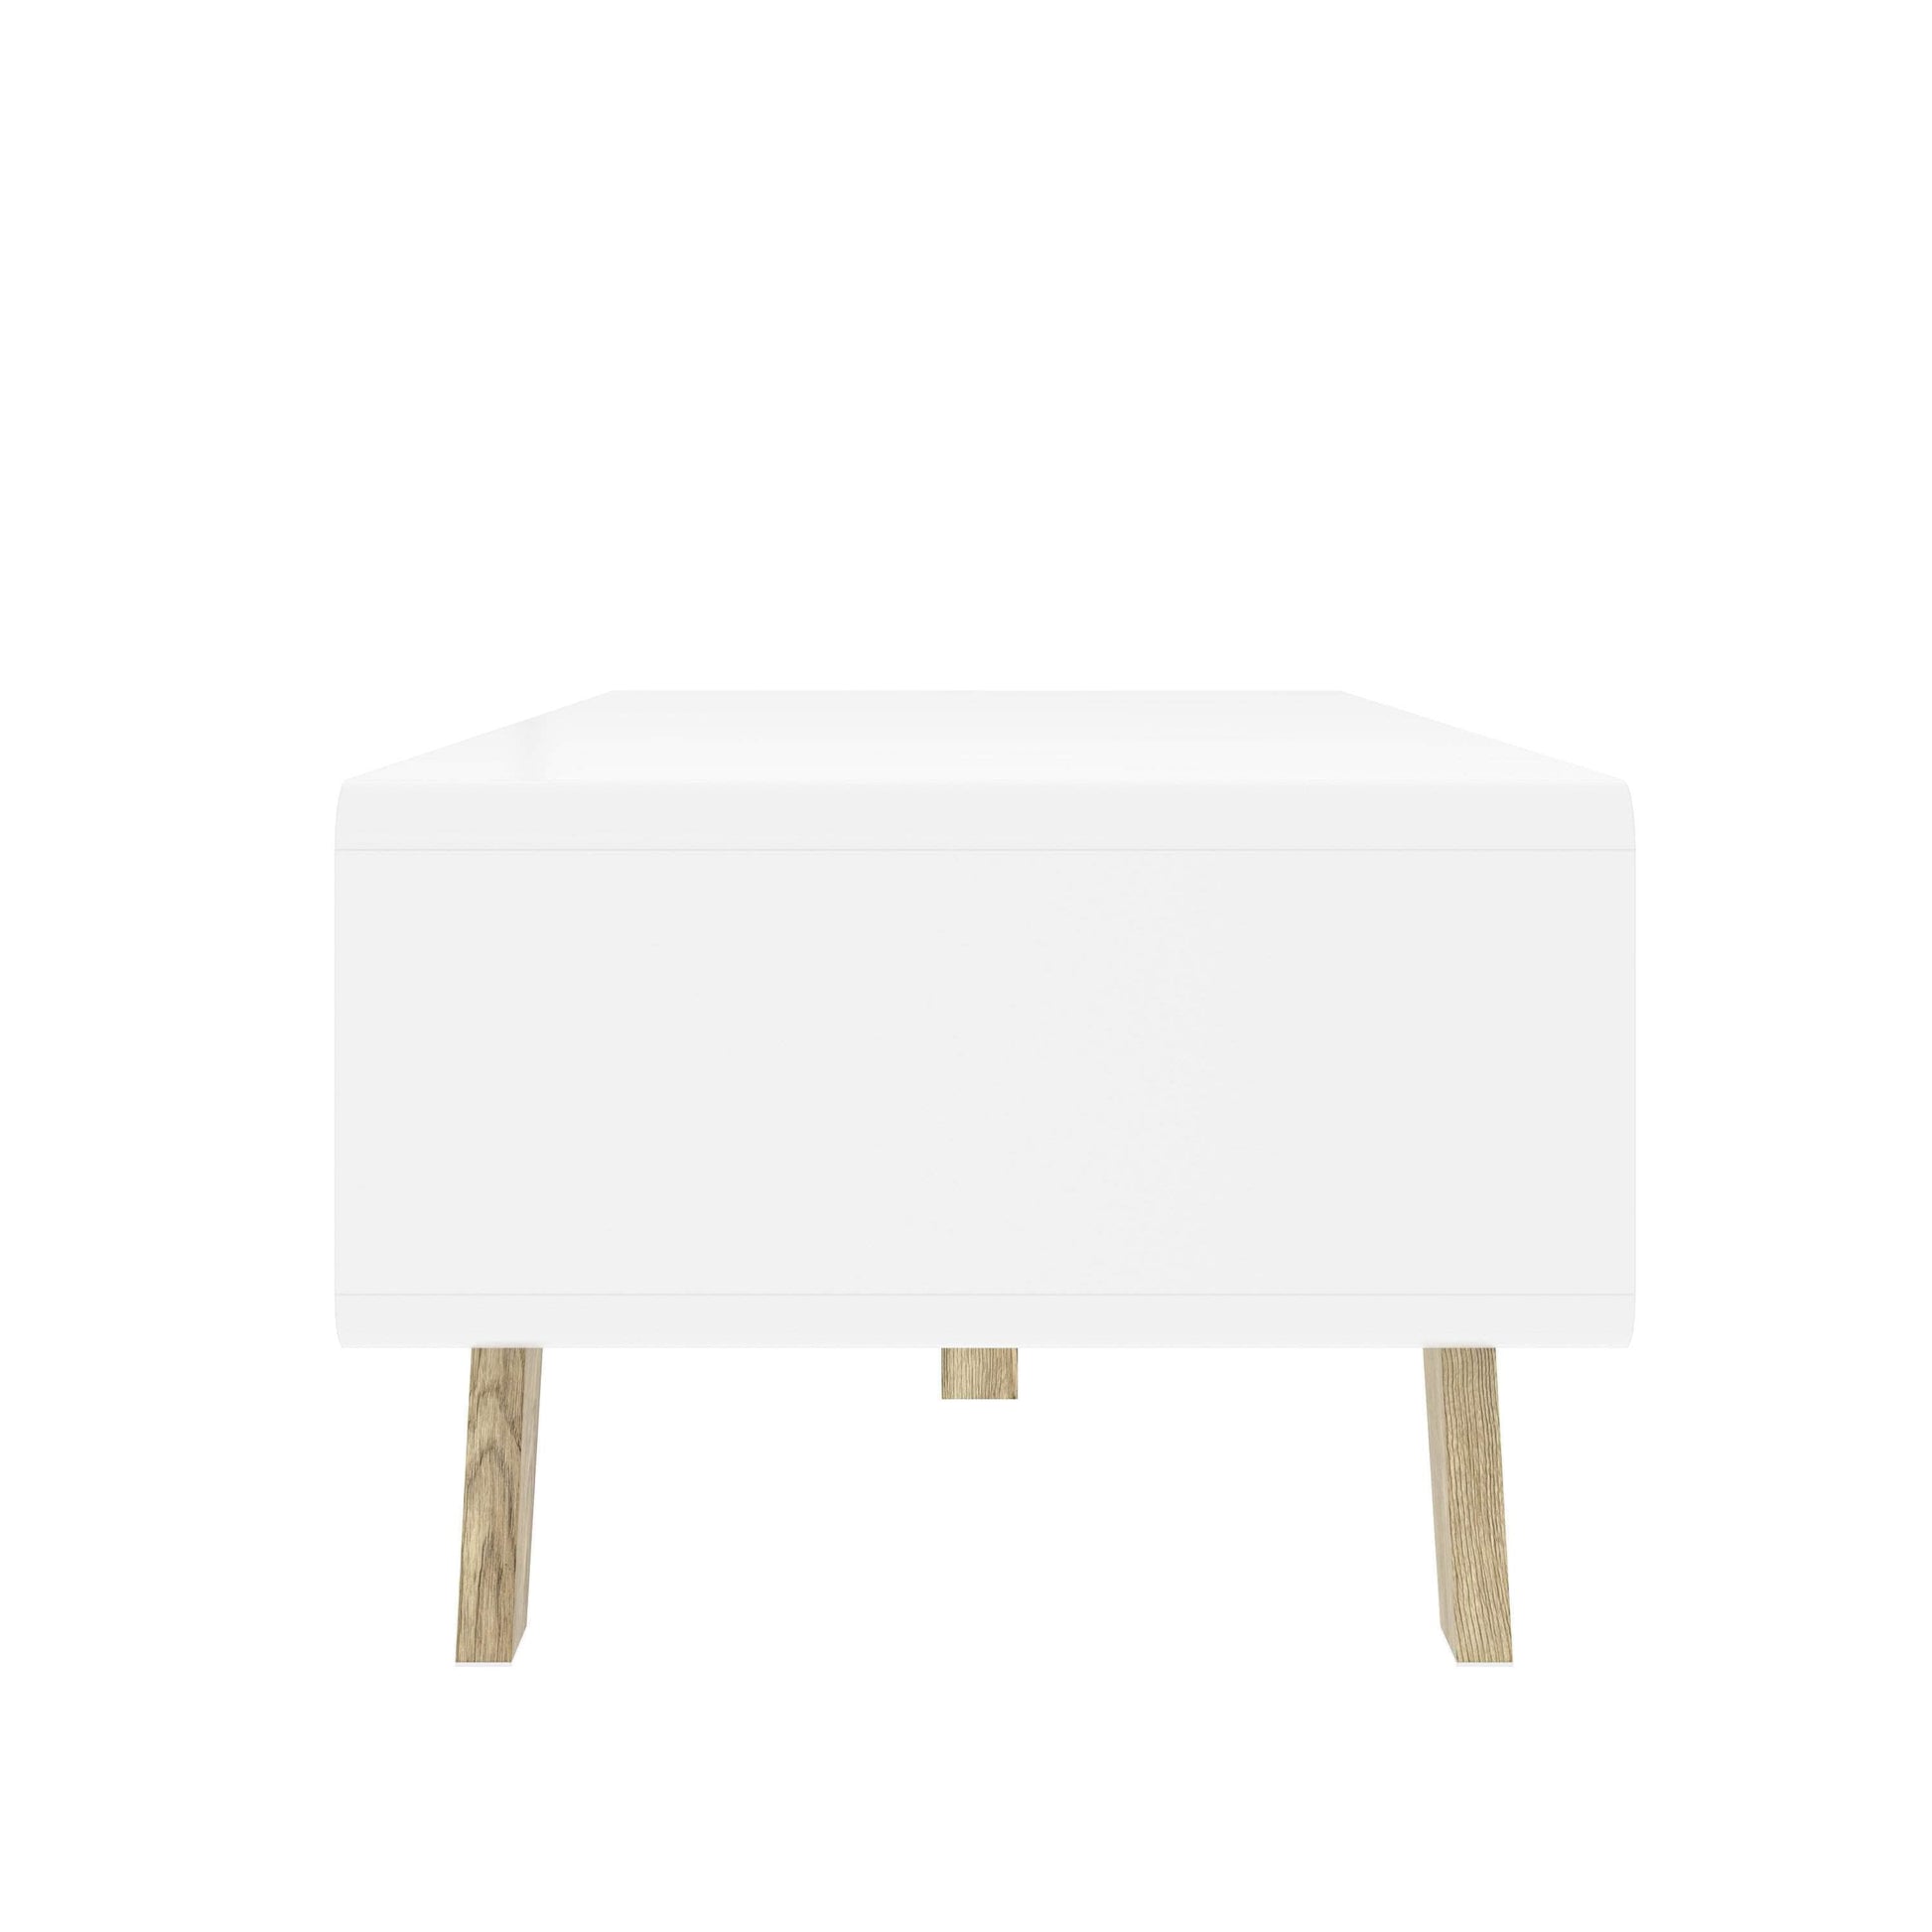 Modubox Coffee Table Alhena 48W Coffee Table - Available in 2 Colours